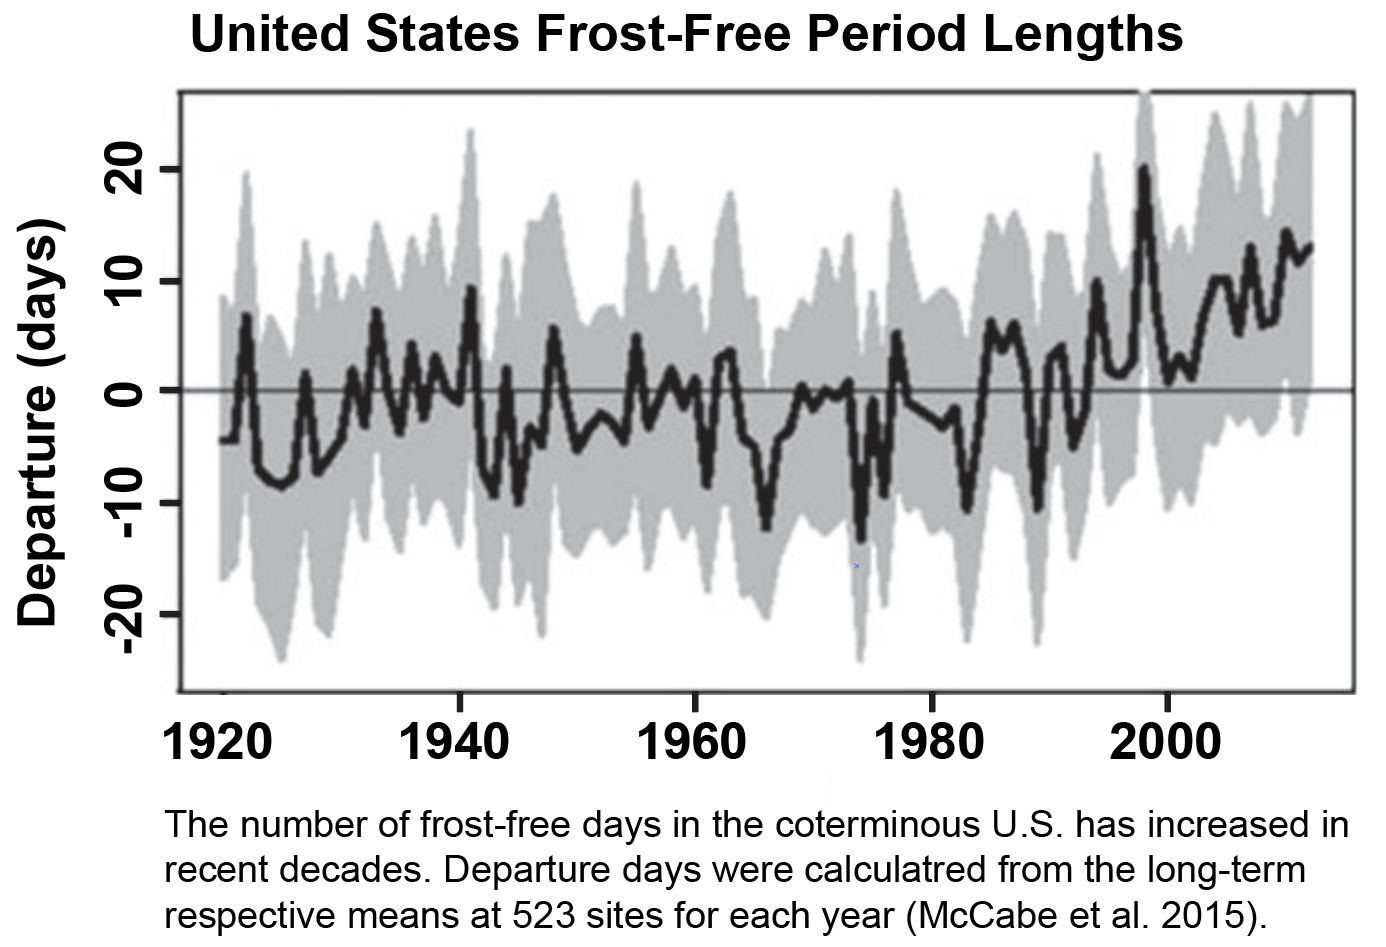 Frost free days are rising in the U.S.